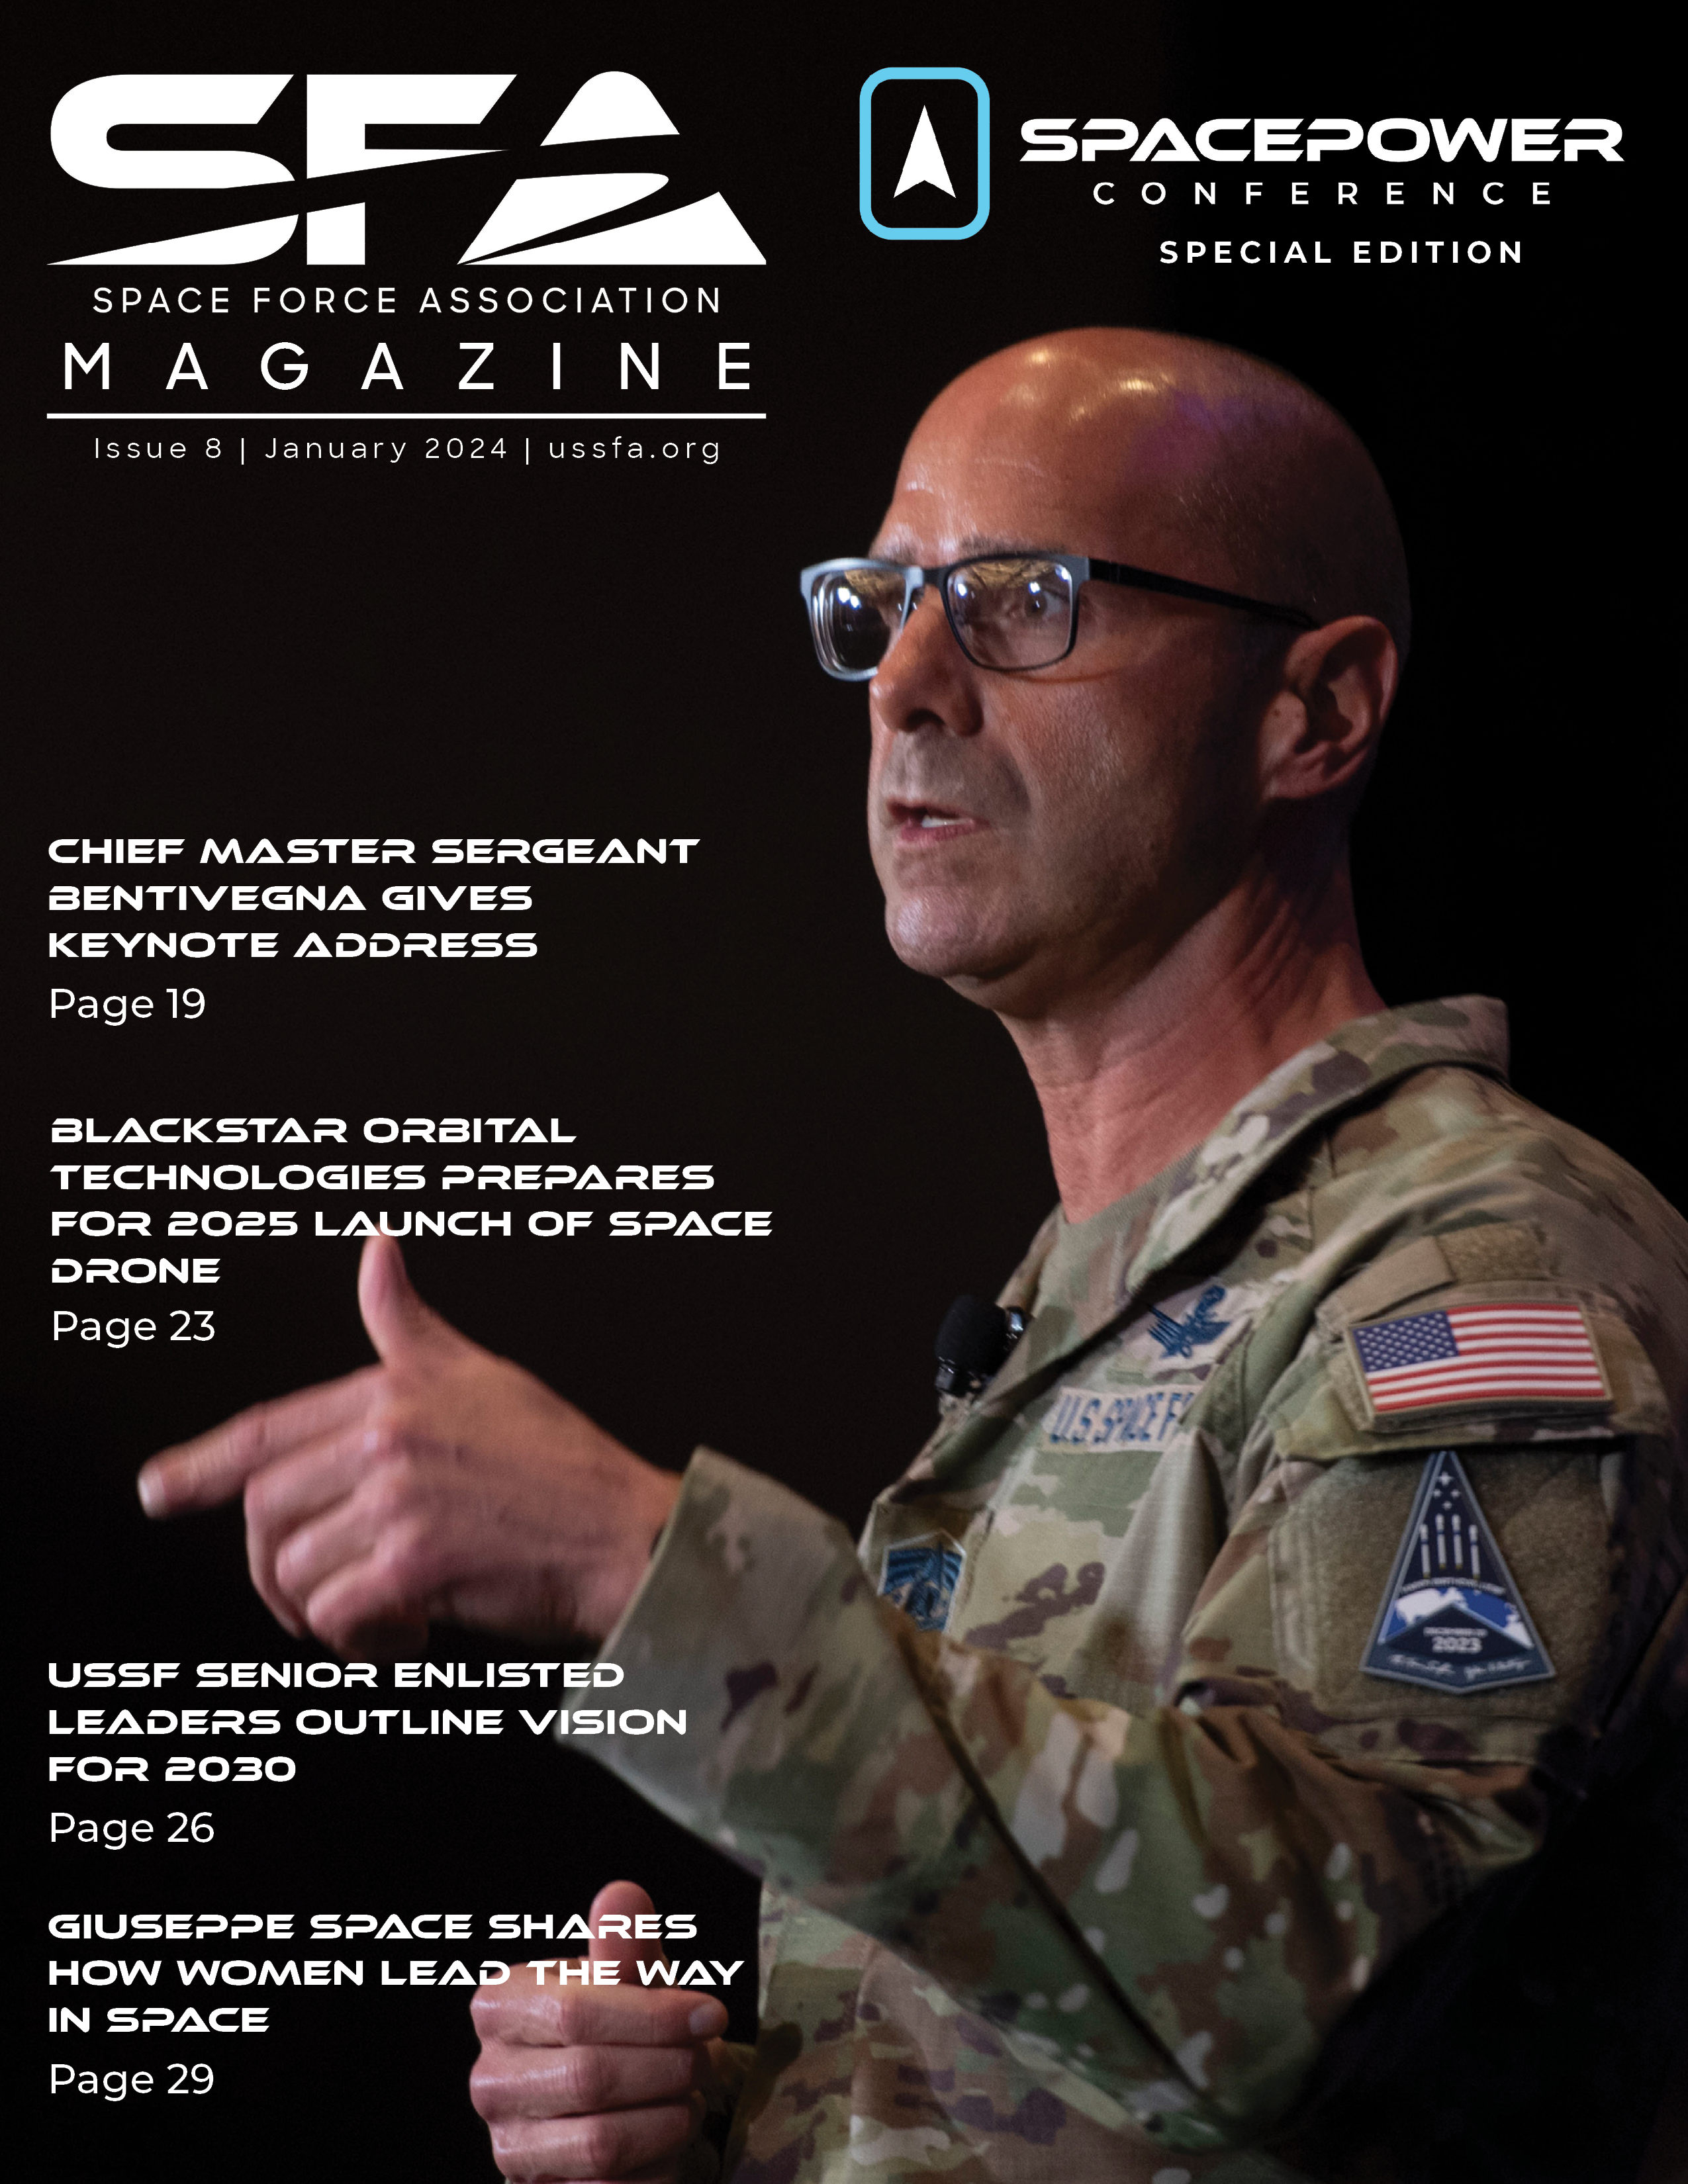 SFAMag_Spacepower_PostEvent_Edition_Cover